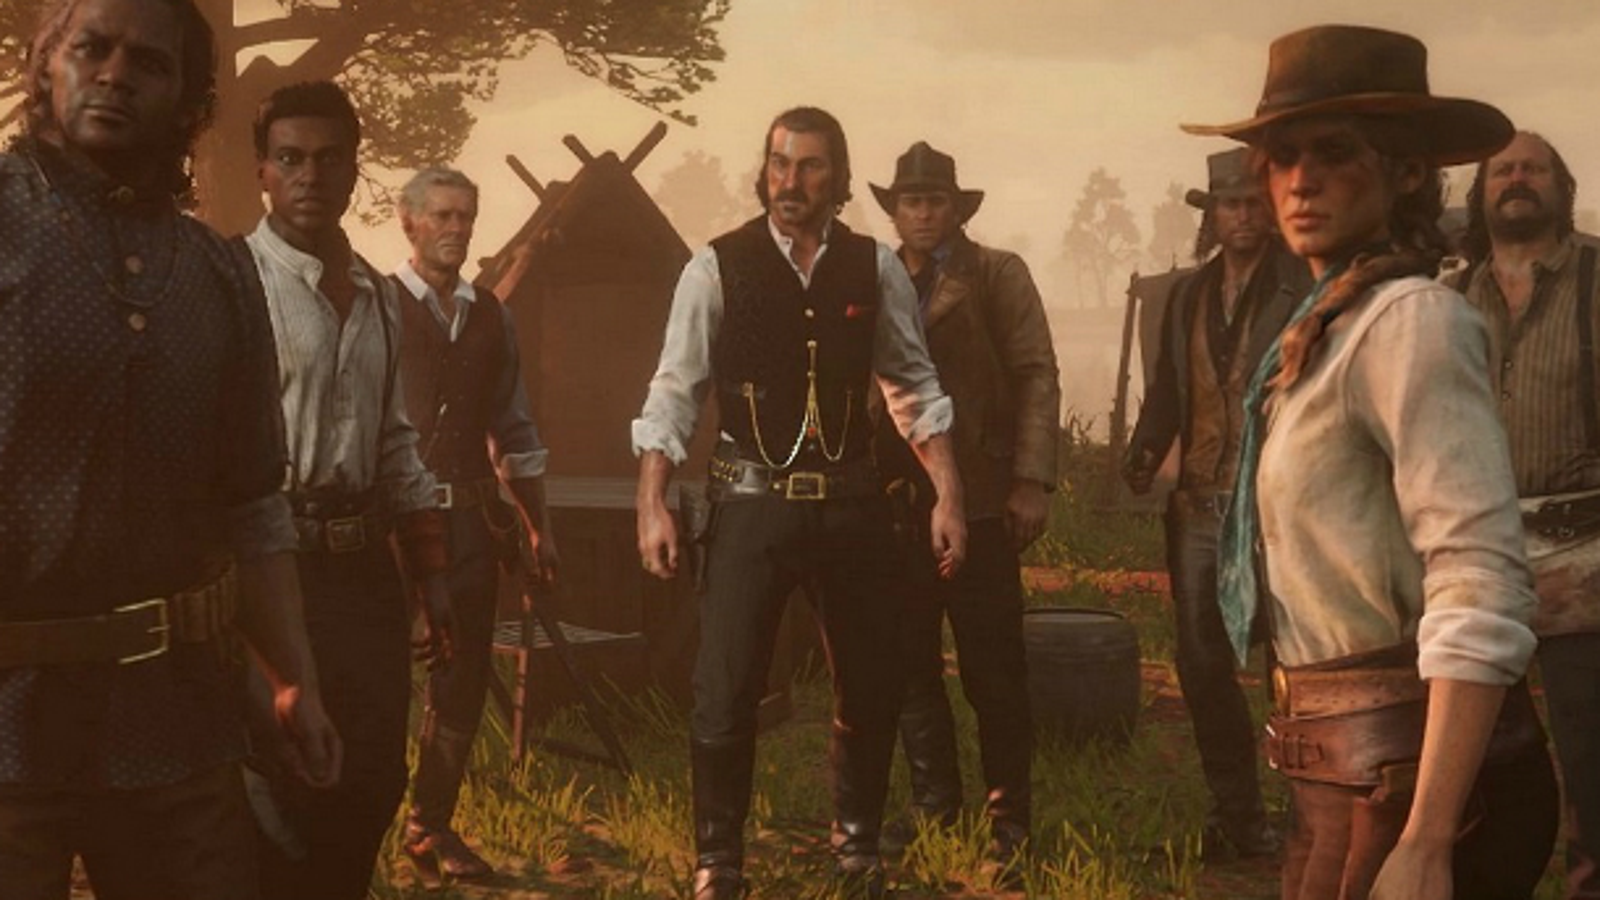 Mew Mew barm Forge Red Dead Redemption 2 Spoilers FAQ: Endings, Deaths and More | VG247